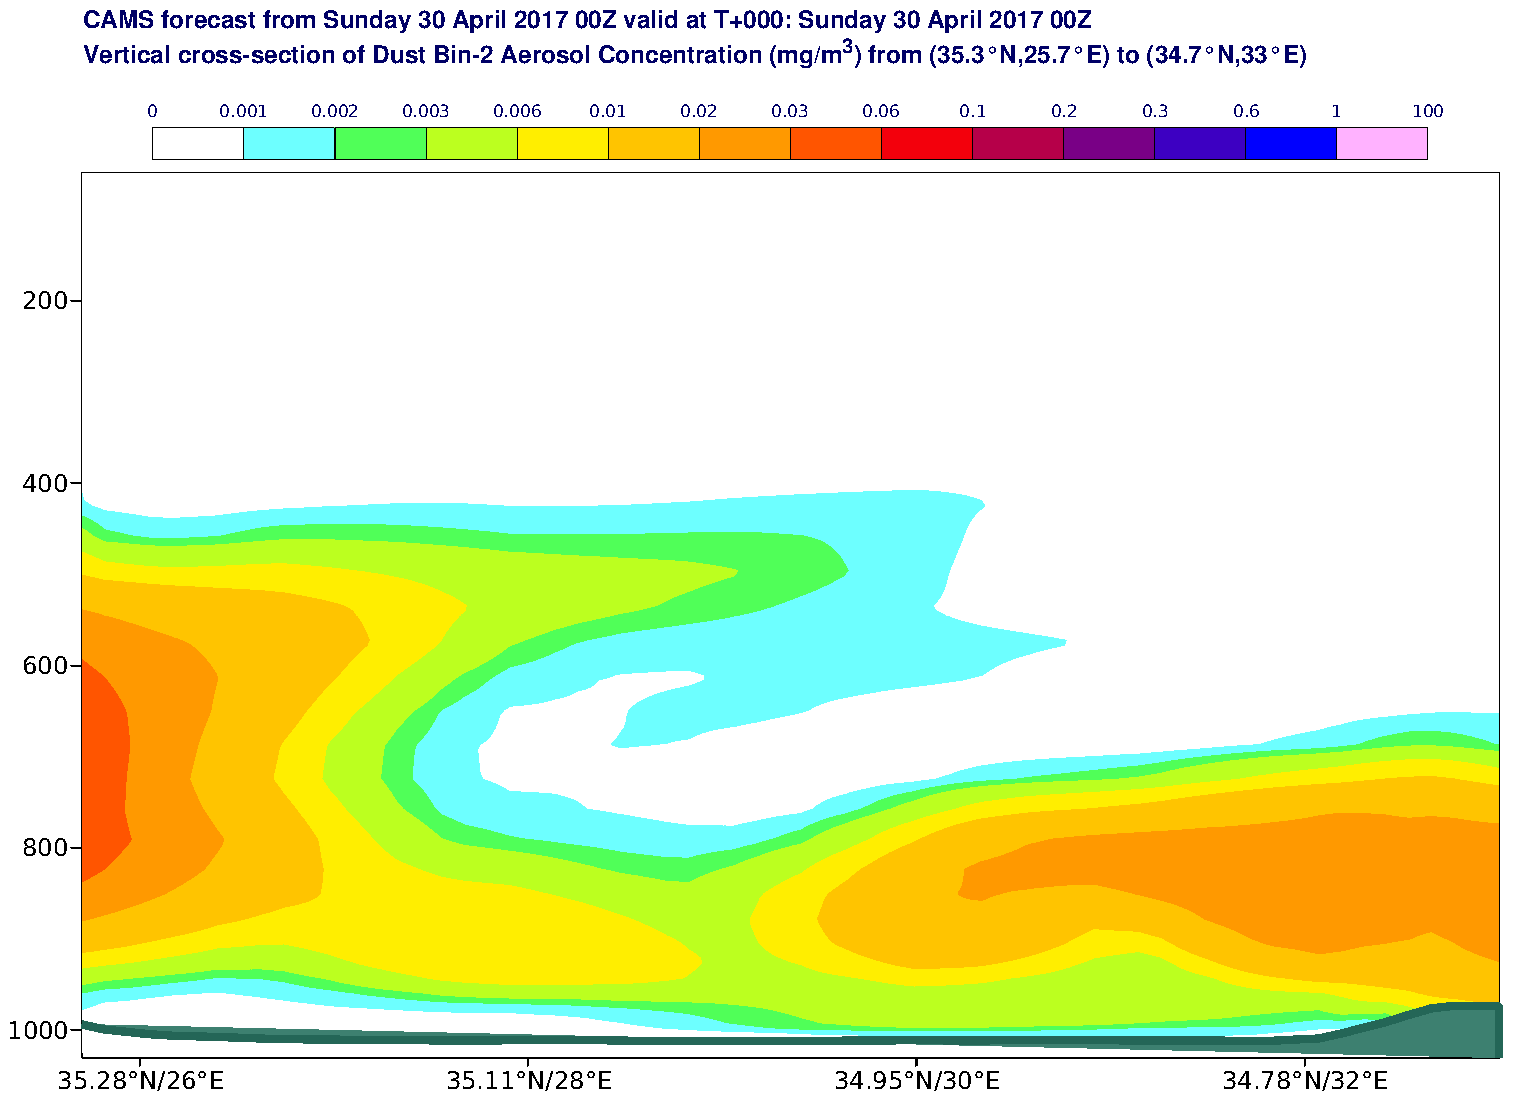 Vertical cross-section of Dust Bin-2 Aerosol Concentration (mg/m3) valid at T0 - 2017-04-30 00:00